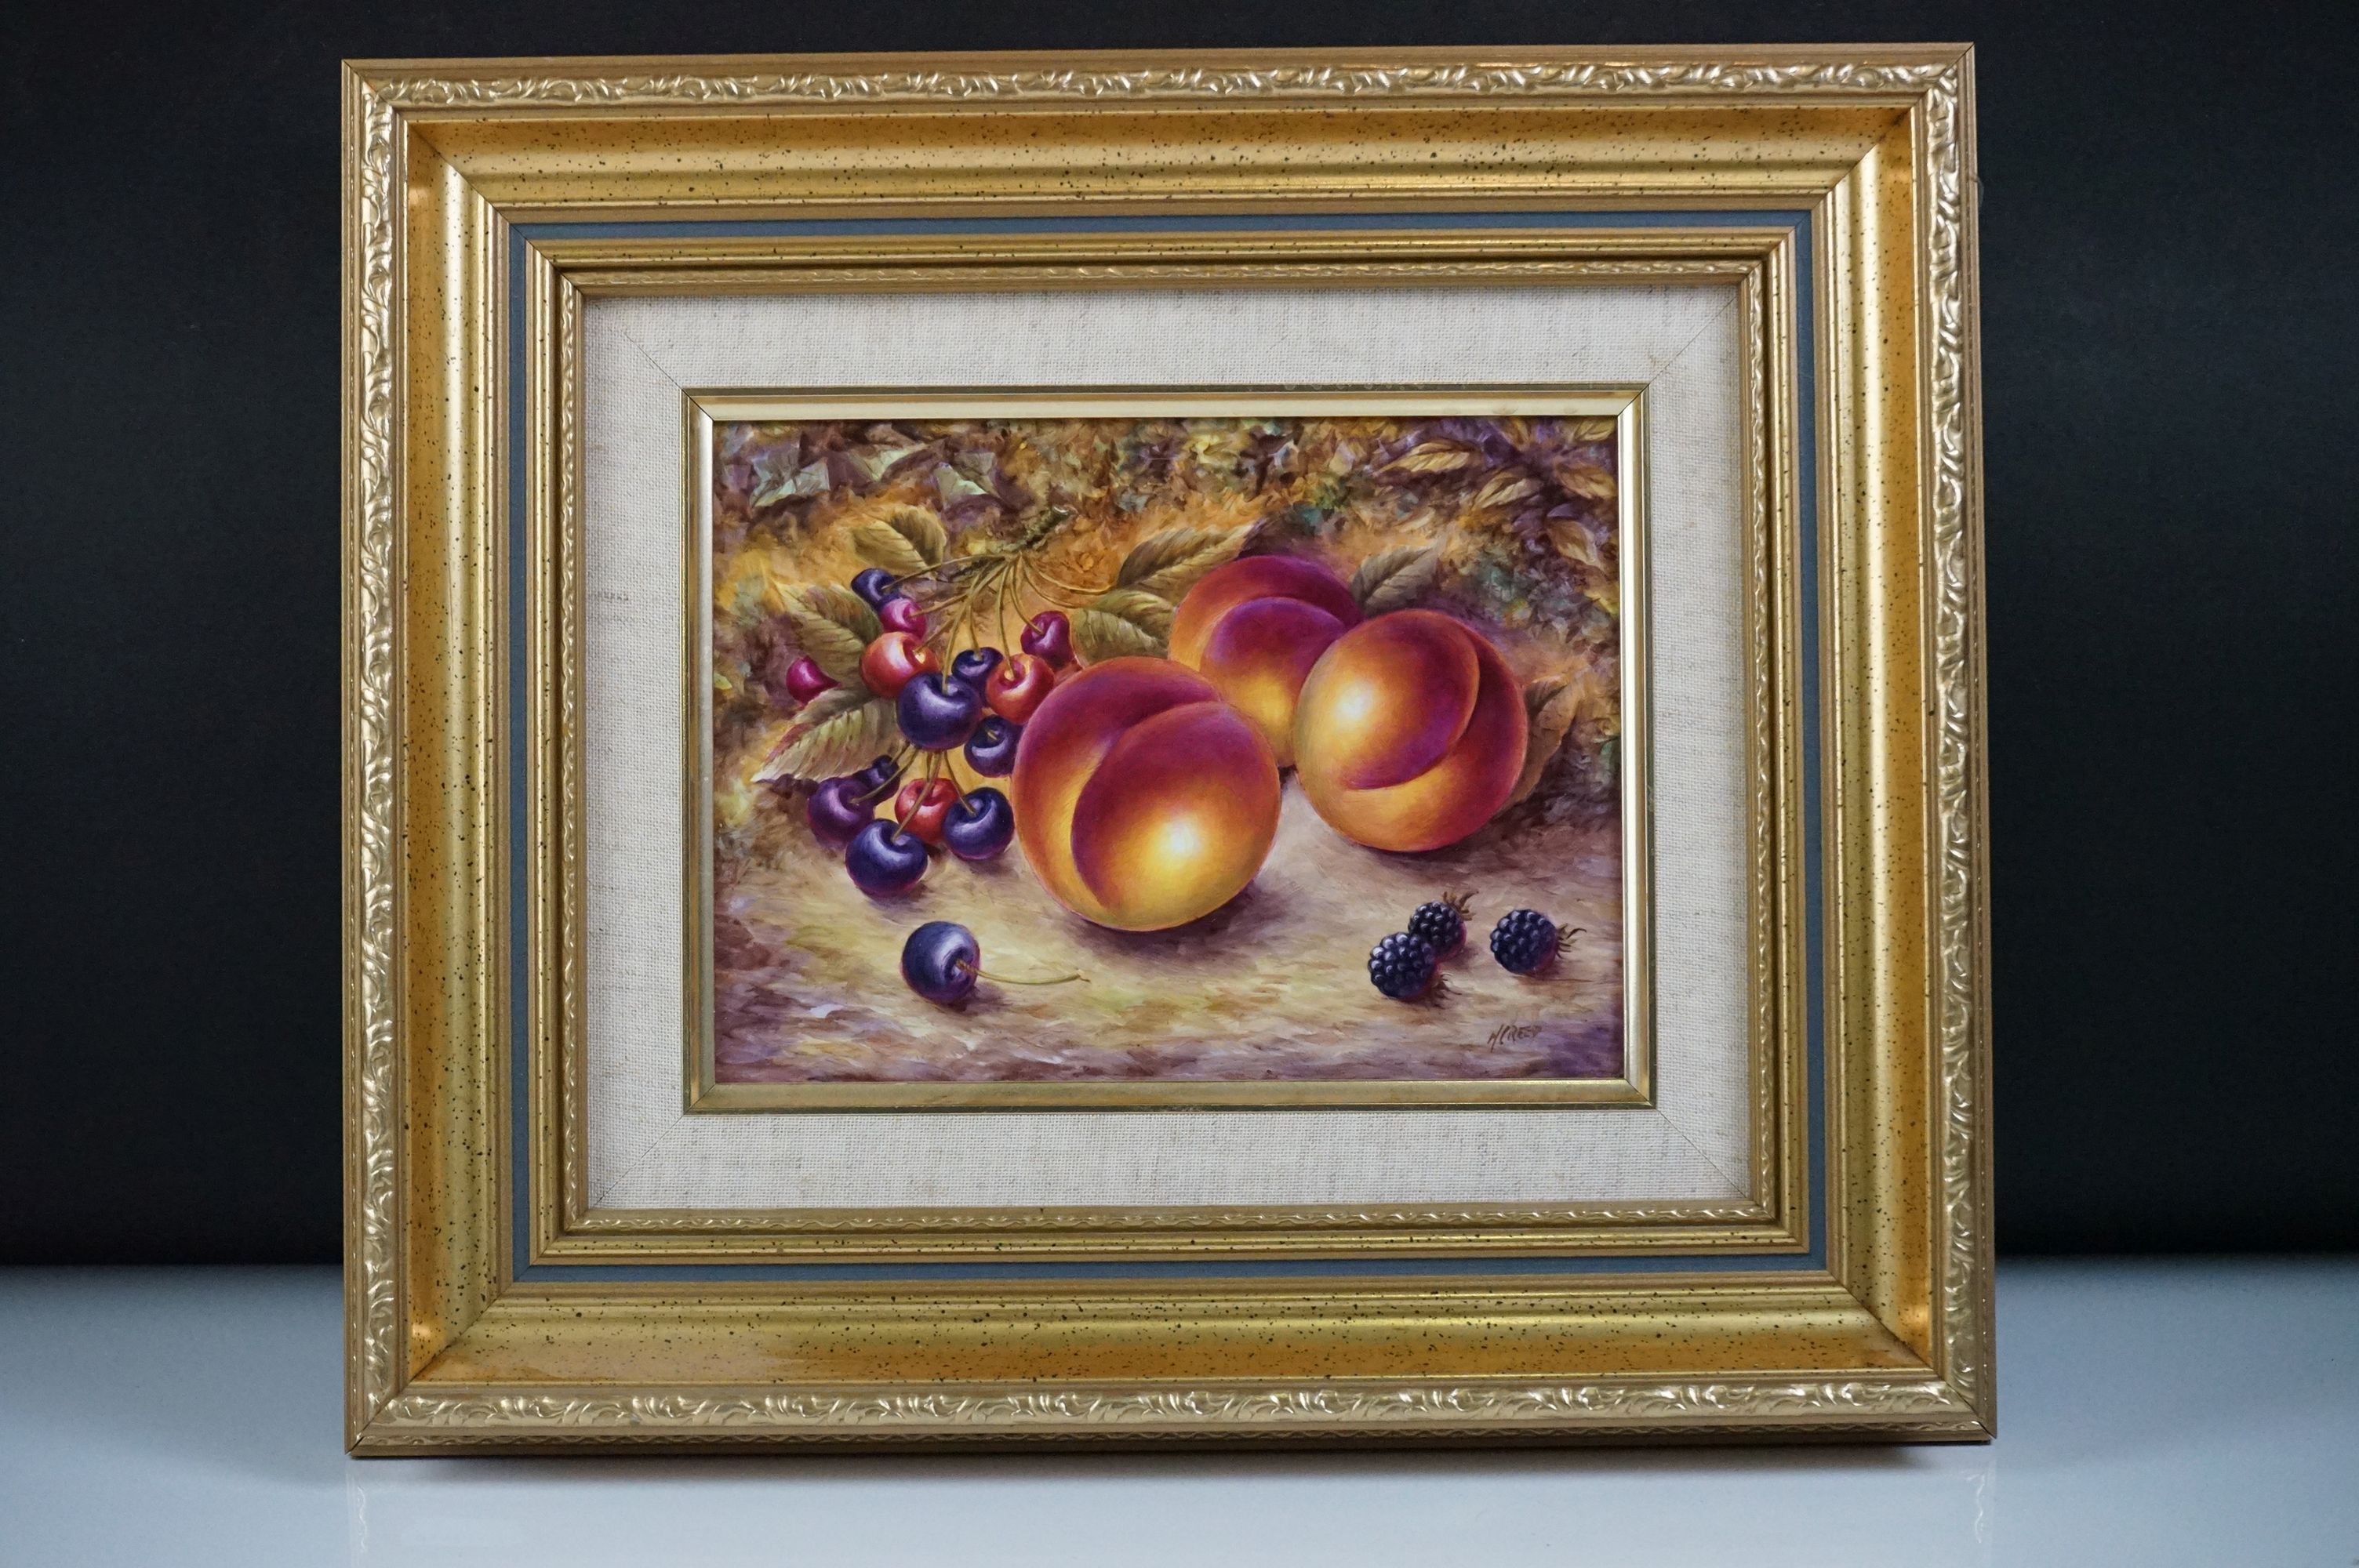 Royal Worcester Artist Nigel Creed hand-painted rectangular plaque of still life peaches, cherries